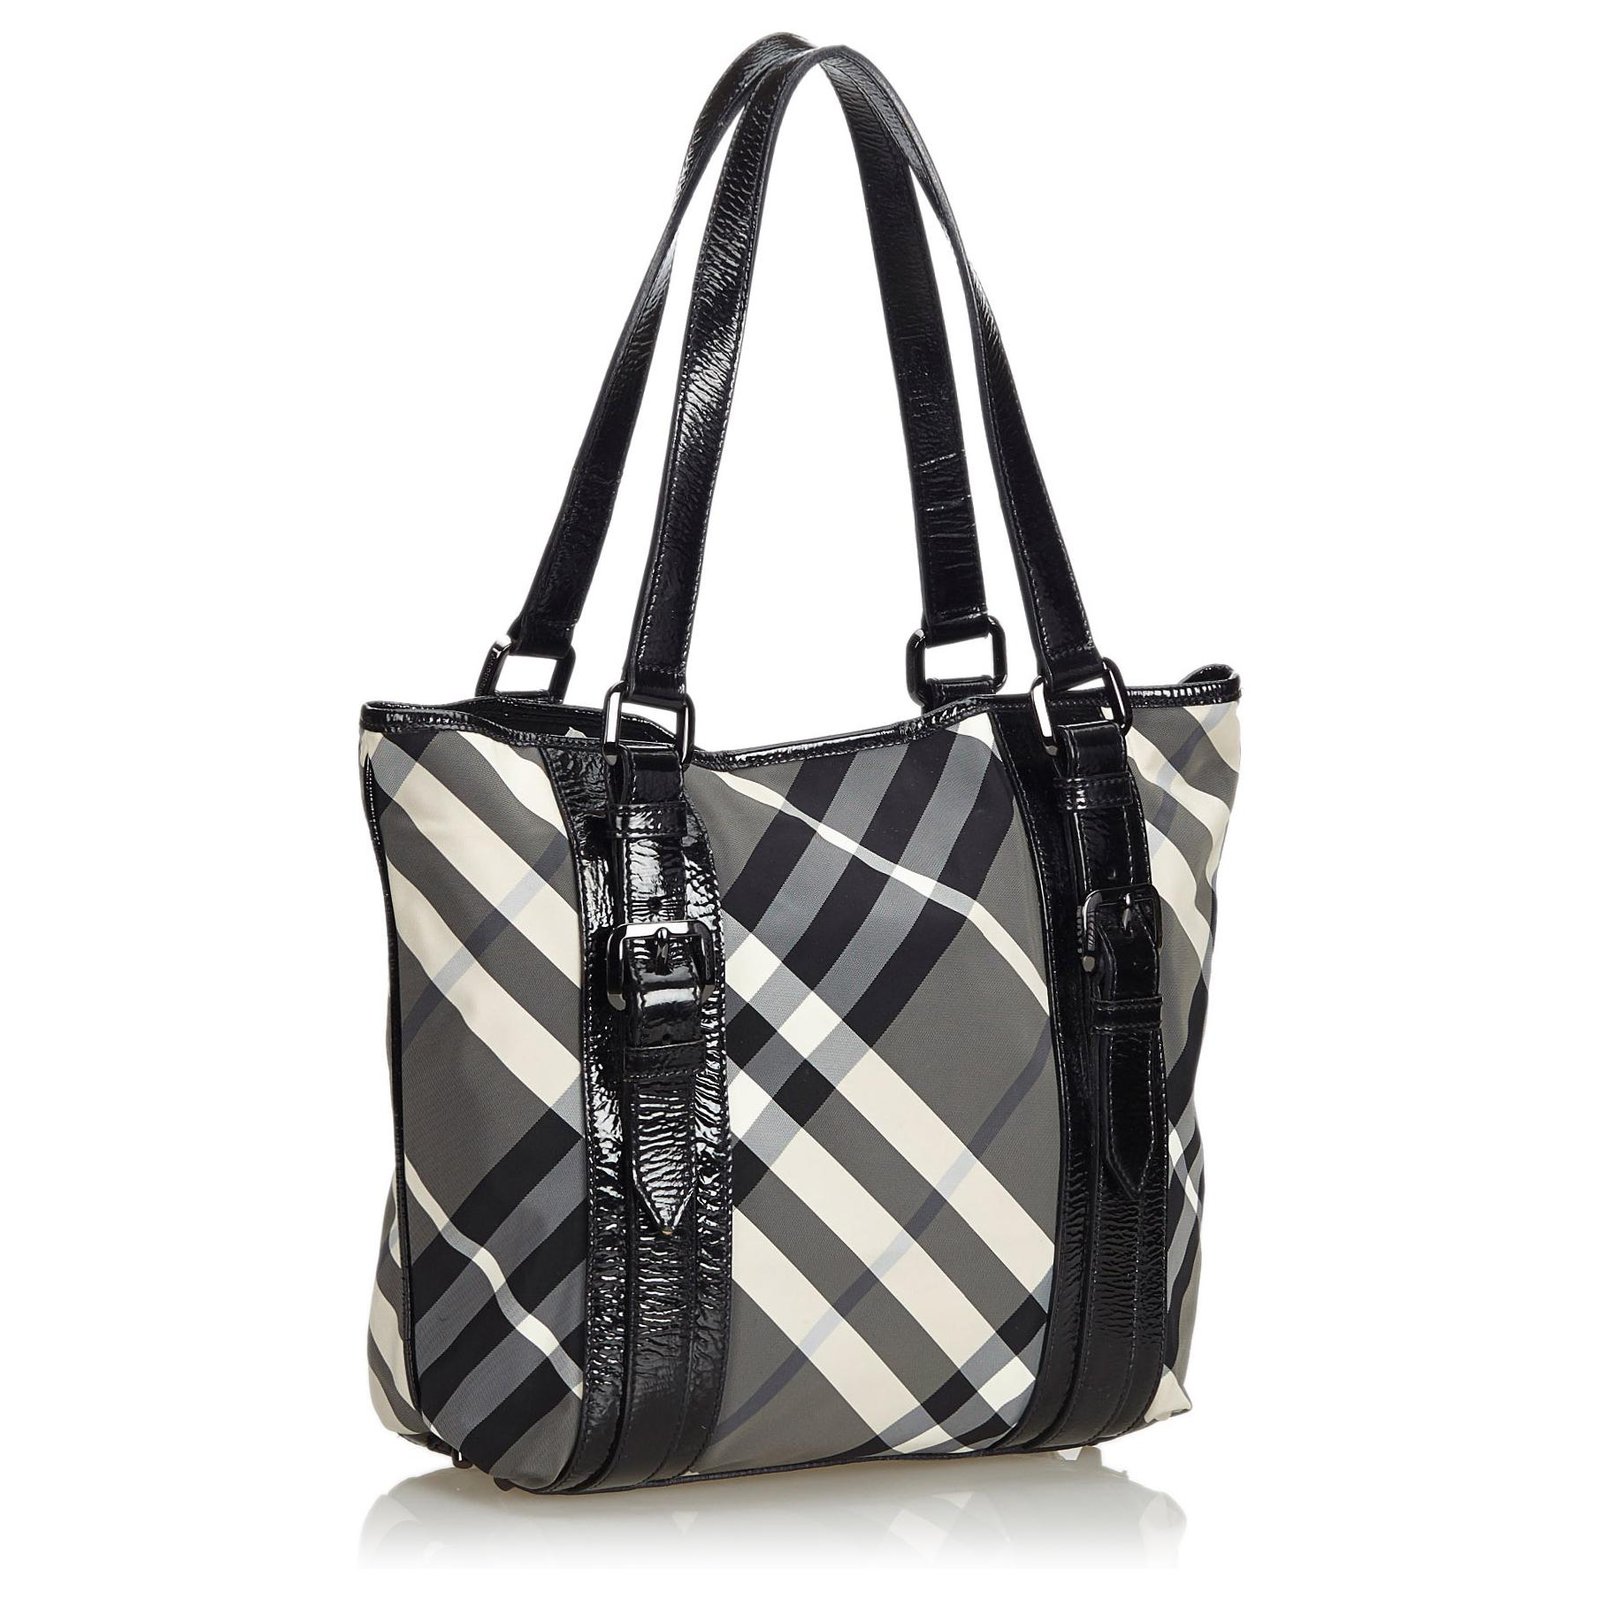 BURBERRY #38292 Black Beat Check Nylon and Patent Leather Penrose